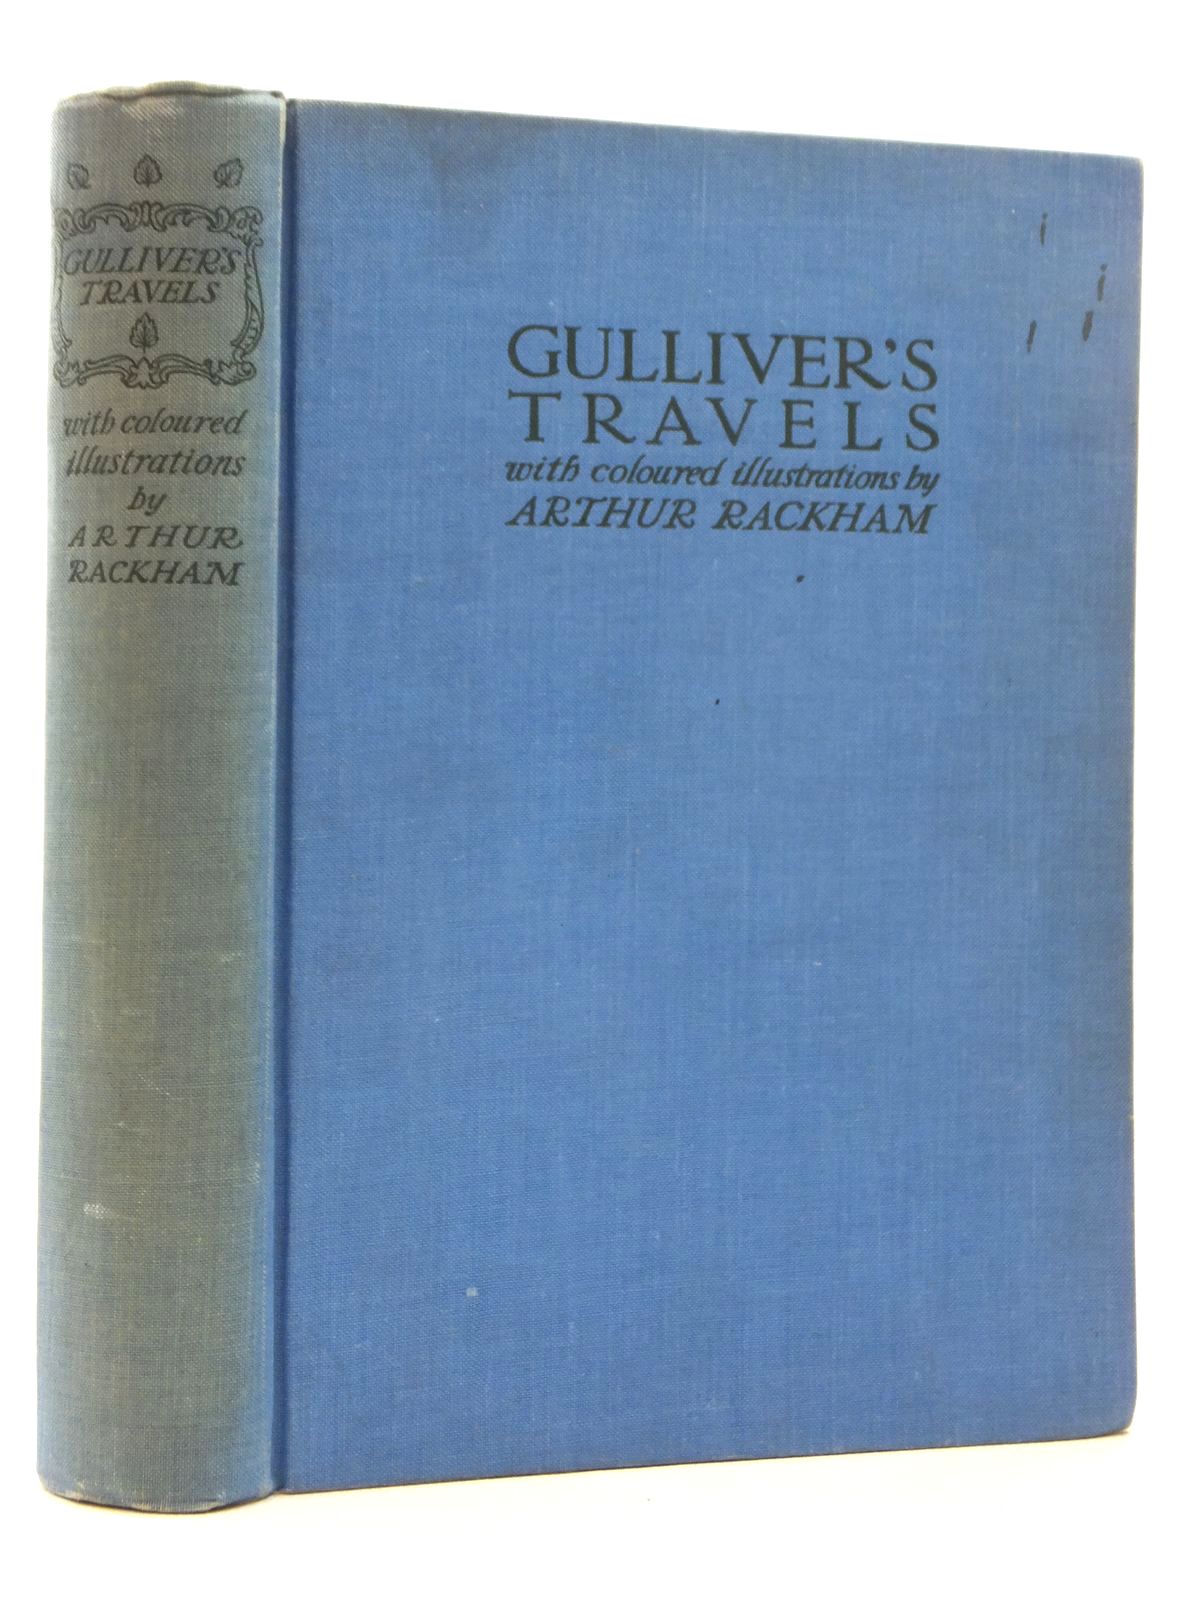 Photo of GULLIVER'S TRAVELS written by Swift, Jonathan illustrated by Rackham, Arthur published by The Temple Press (STOCK CODE: 1317019)  for sale by Stella & Rose's Books